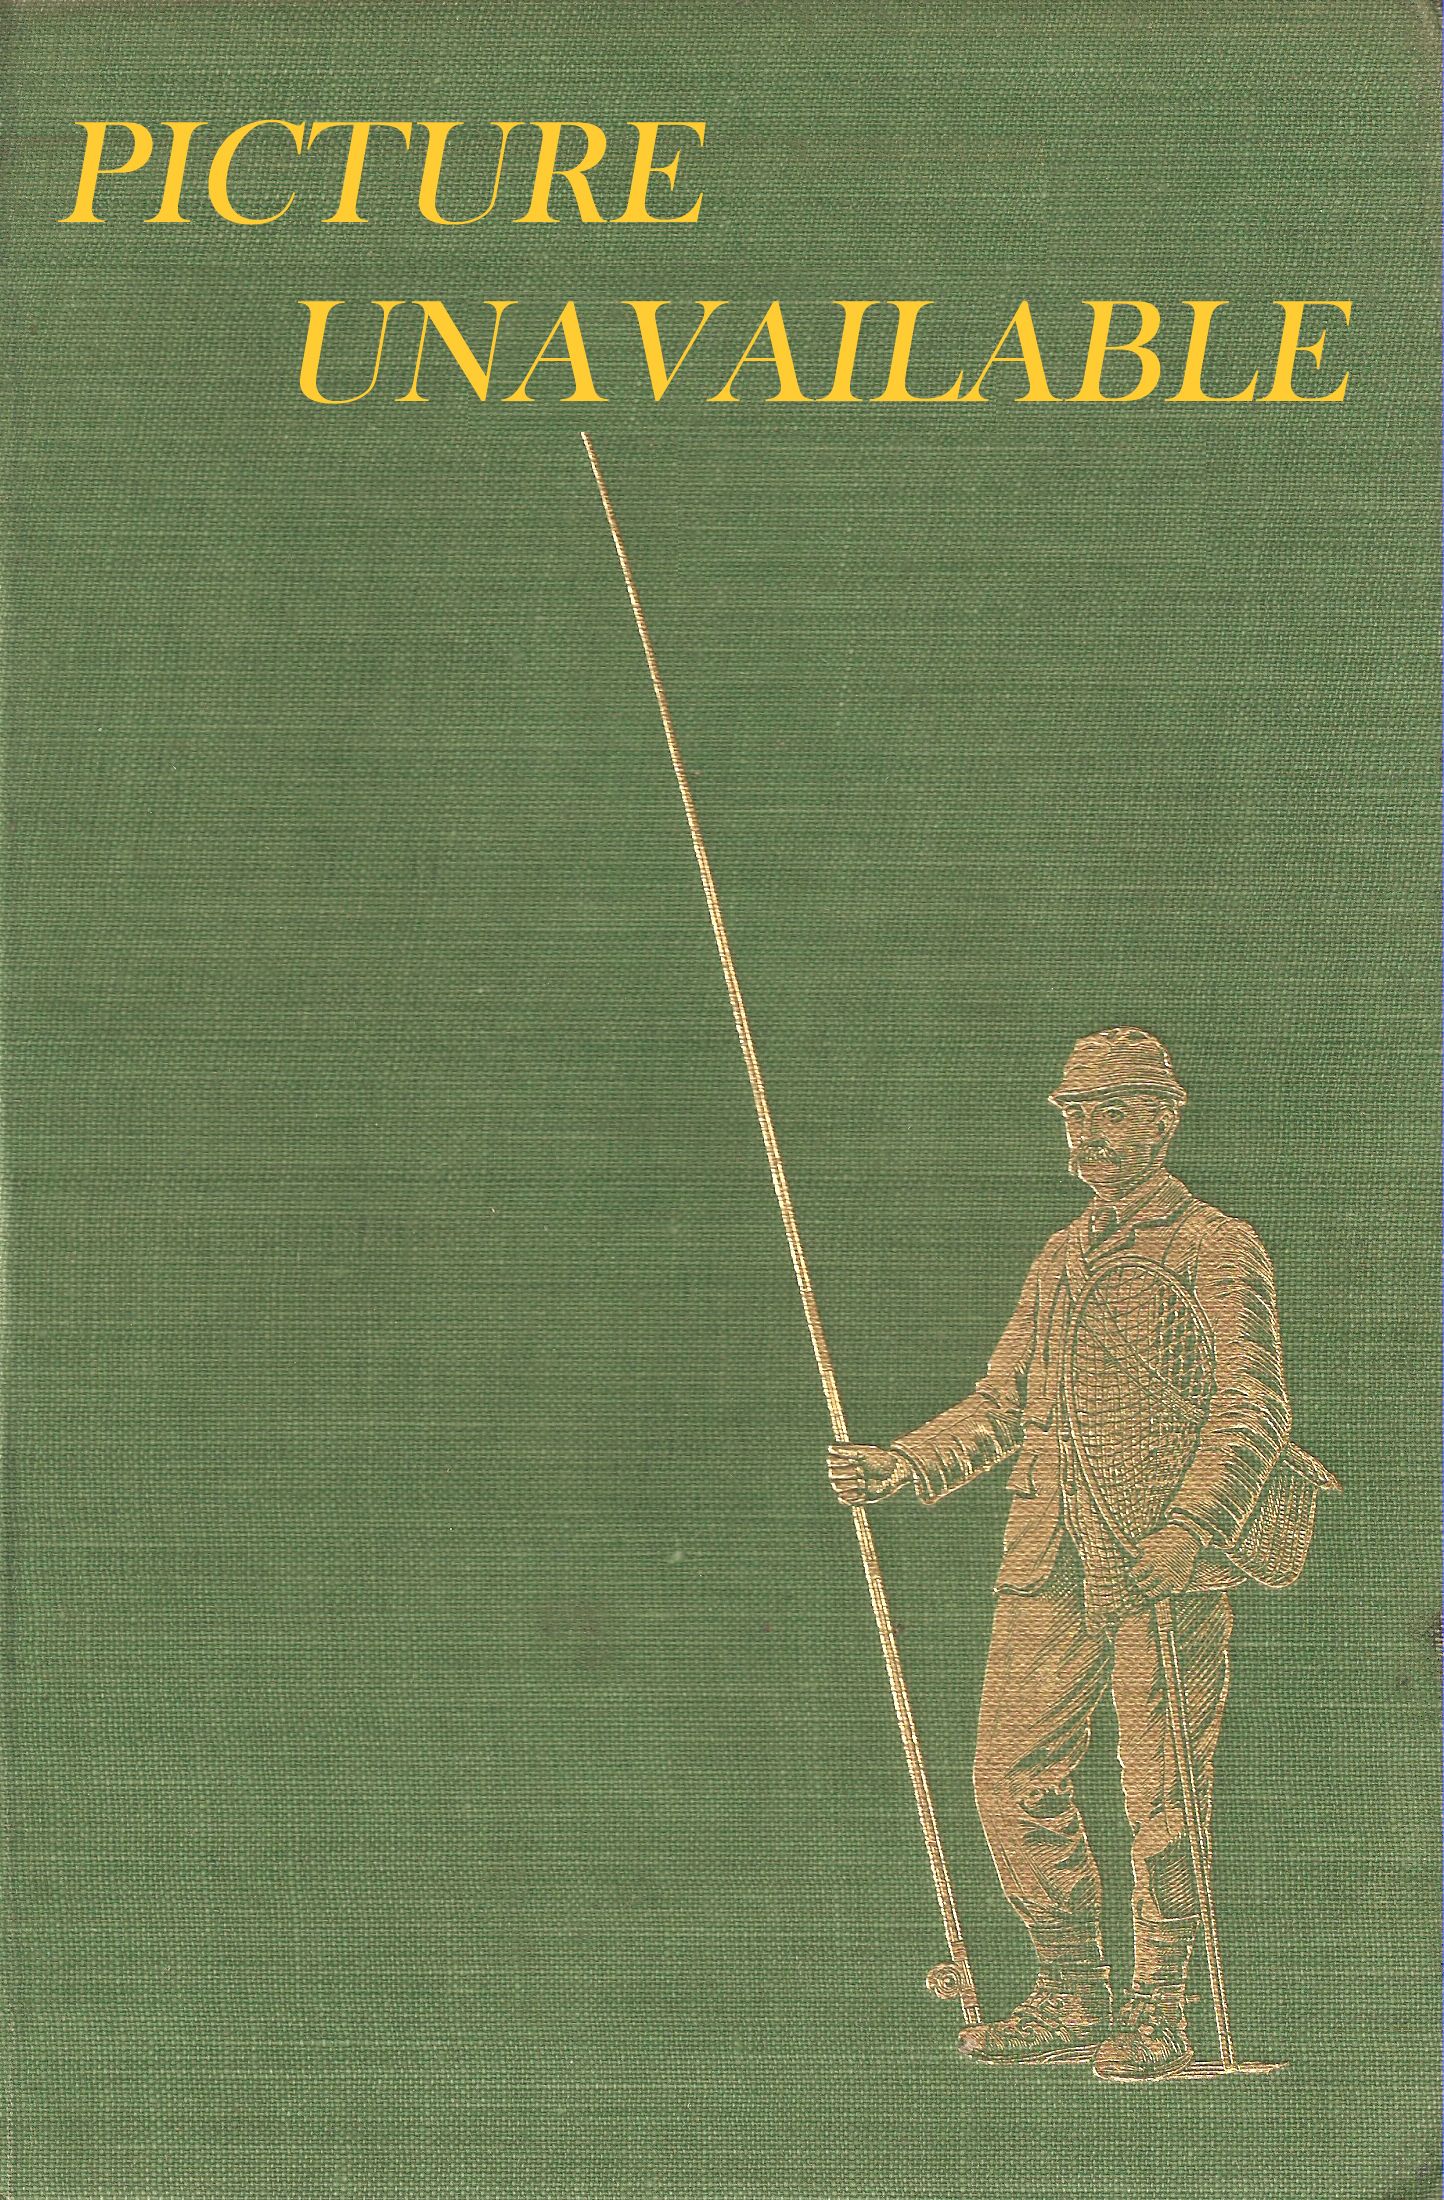 EXPERTS ON GUNS AND SHOOTING. By G.T. Teasdale-Buckell. First edition.